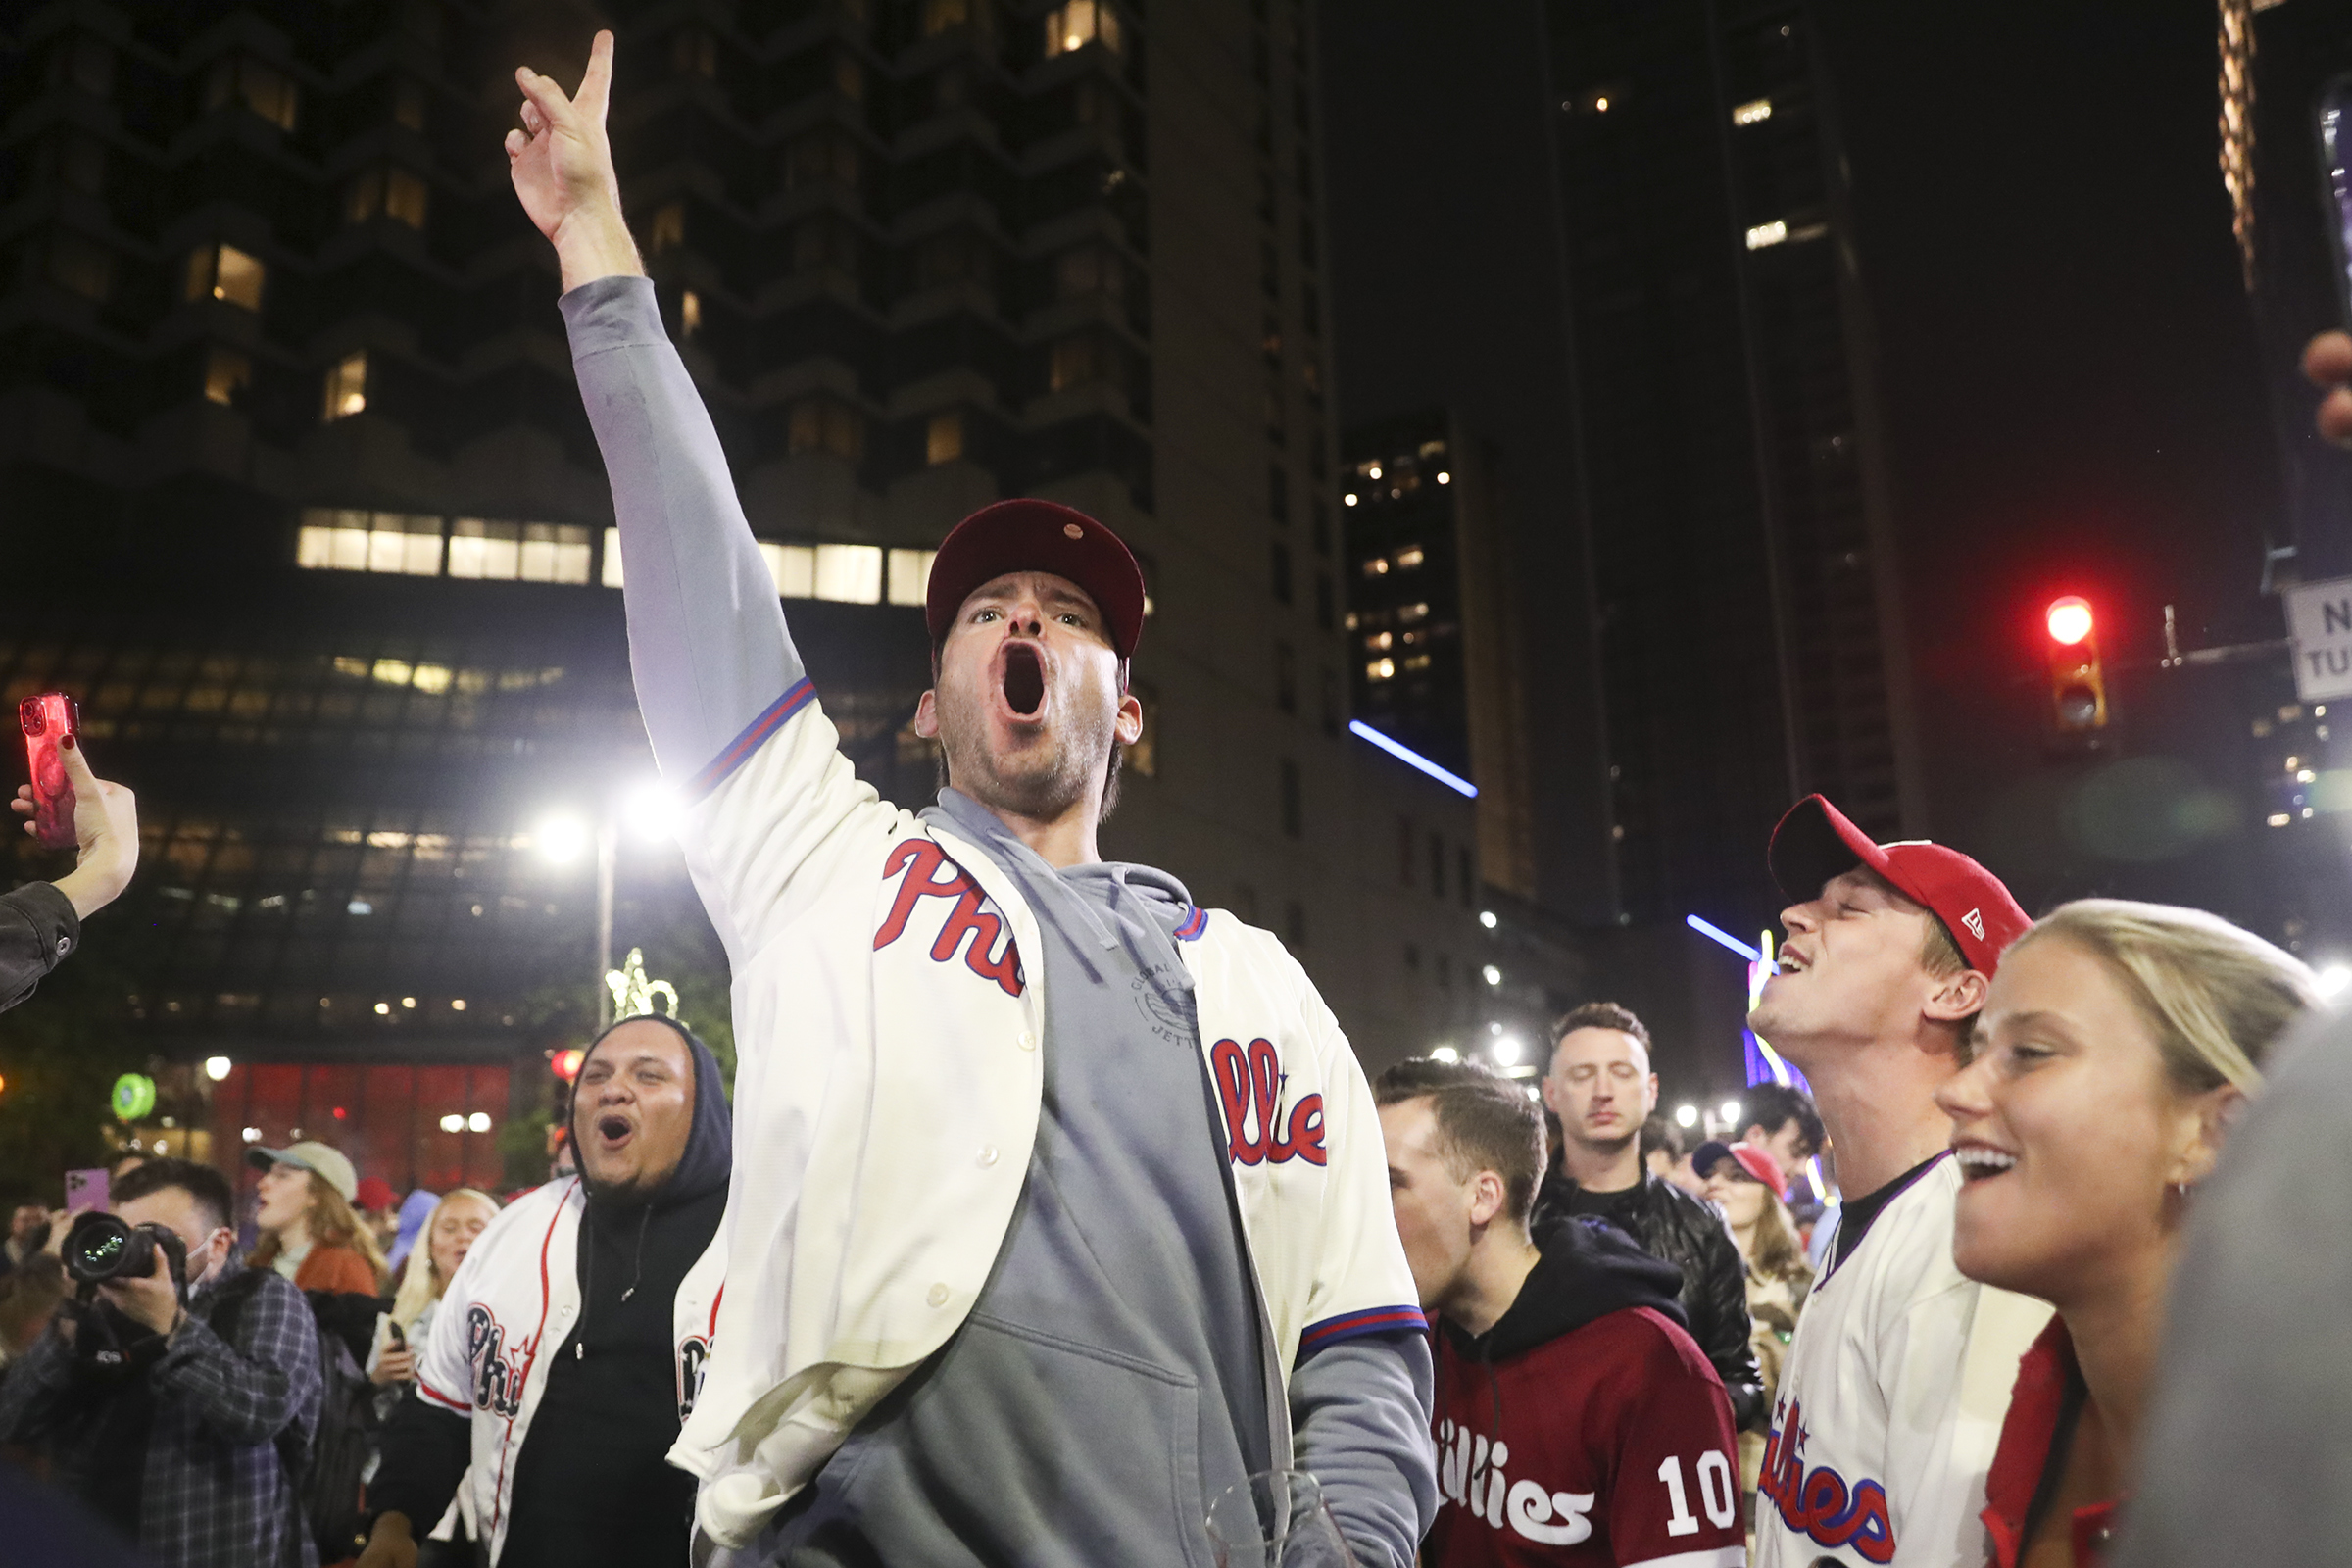 Phillies' World Series trip relished by South Jersey fans